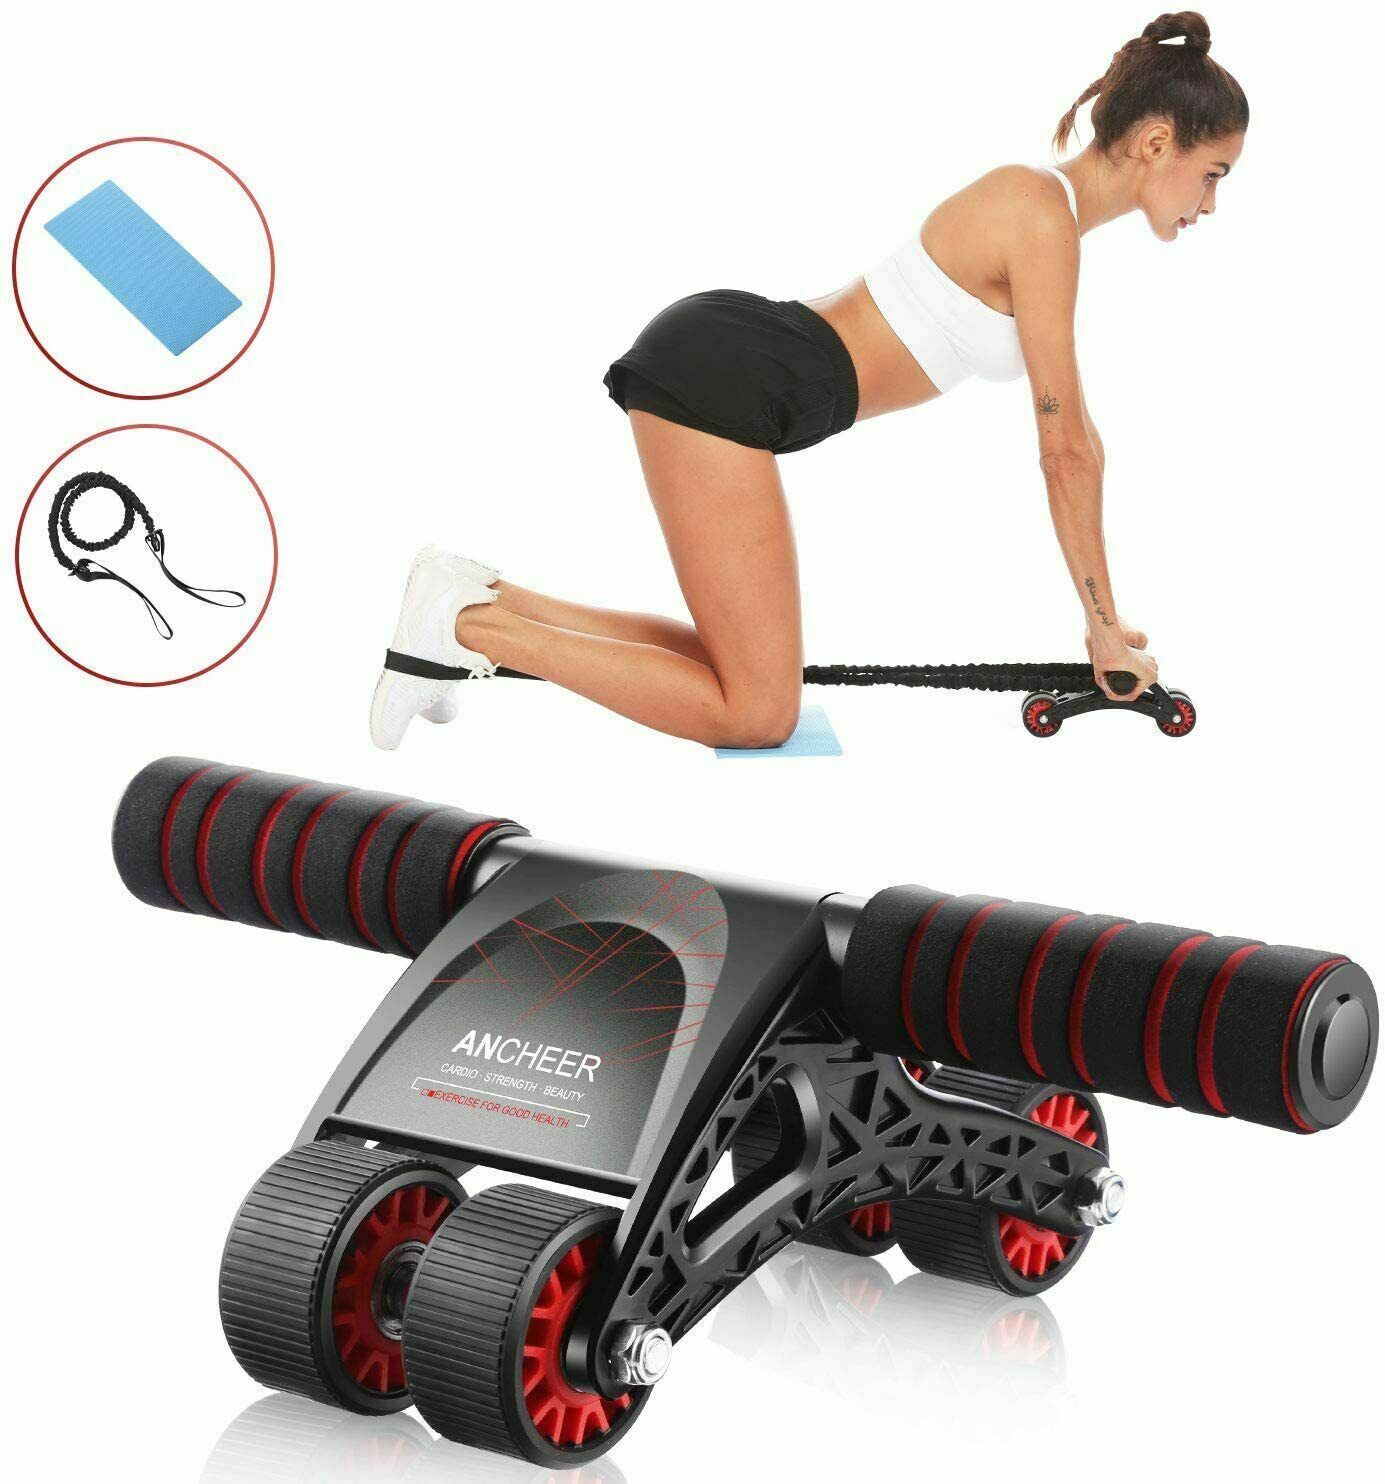 ANCHEER Abdominal Muscle Wheel，AB Wheel Roller with 4 Wheels ，Resistant Bands